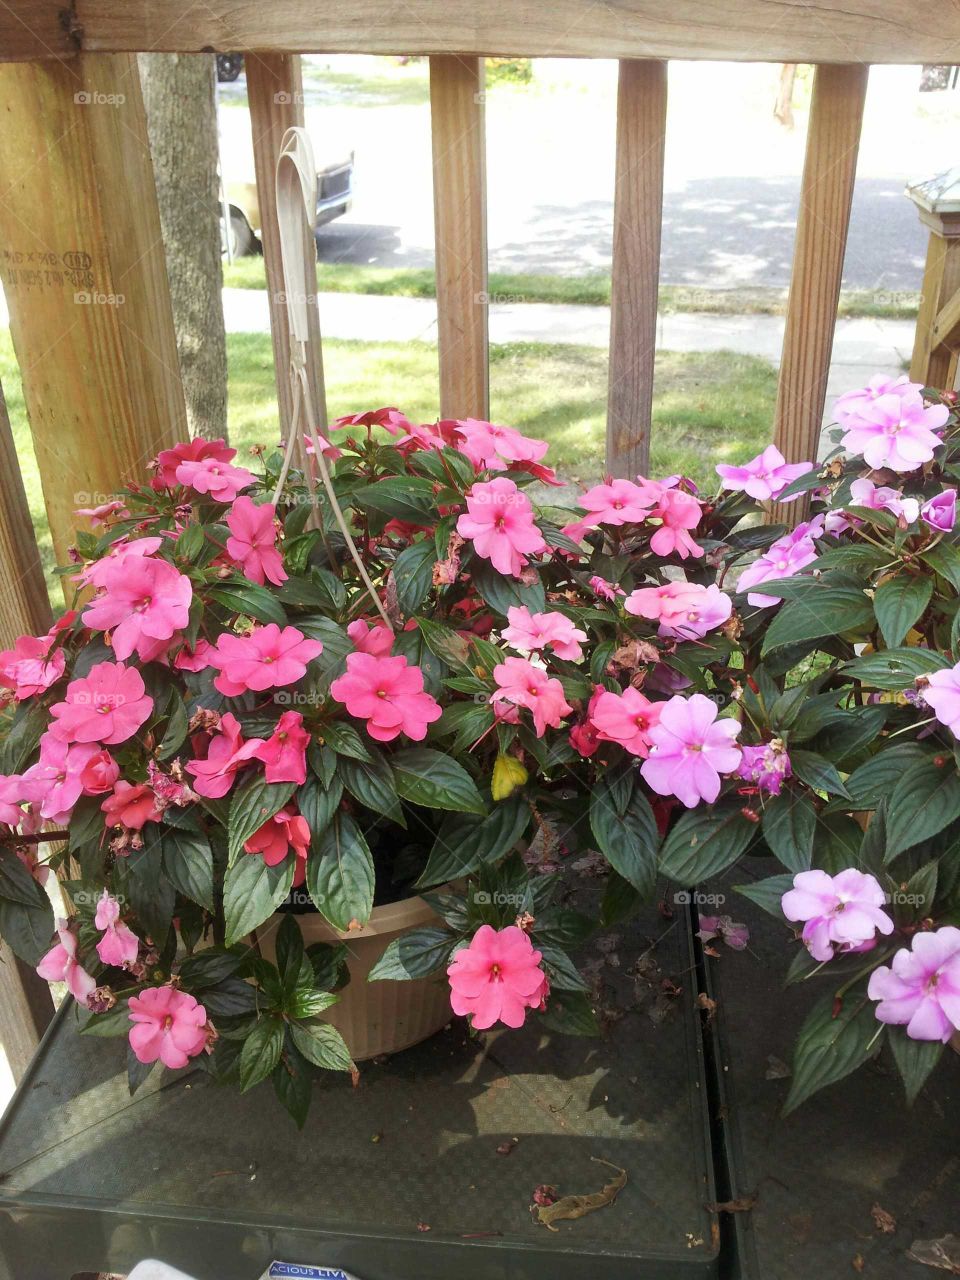 These are beautiful spring flowers we have on our front porch.